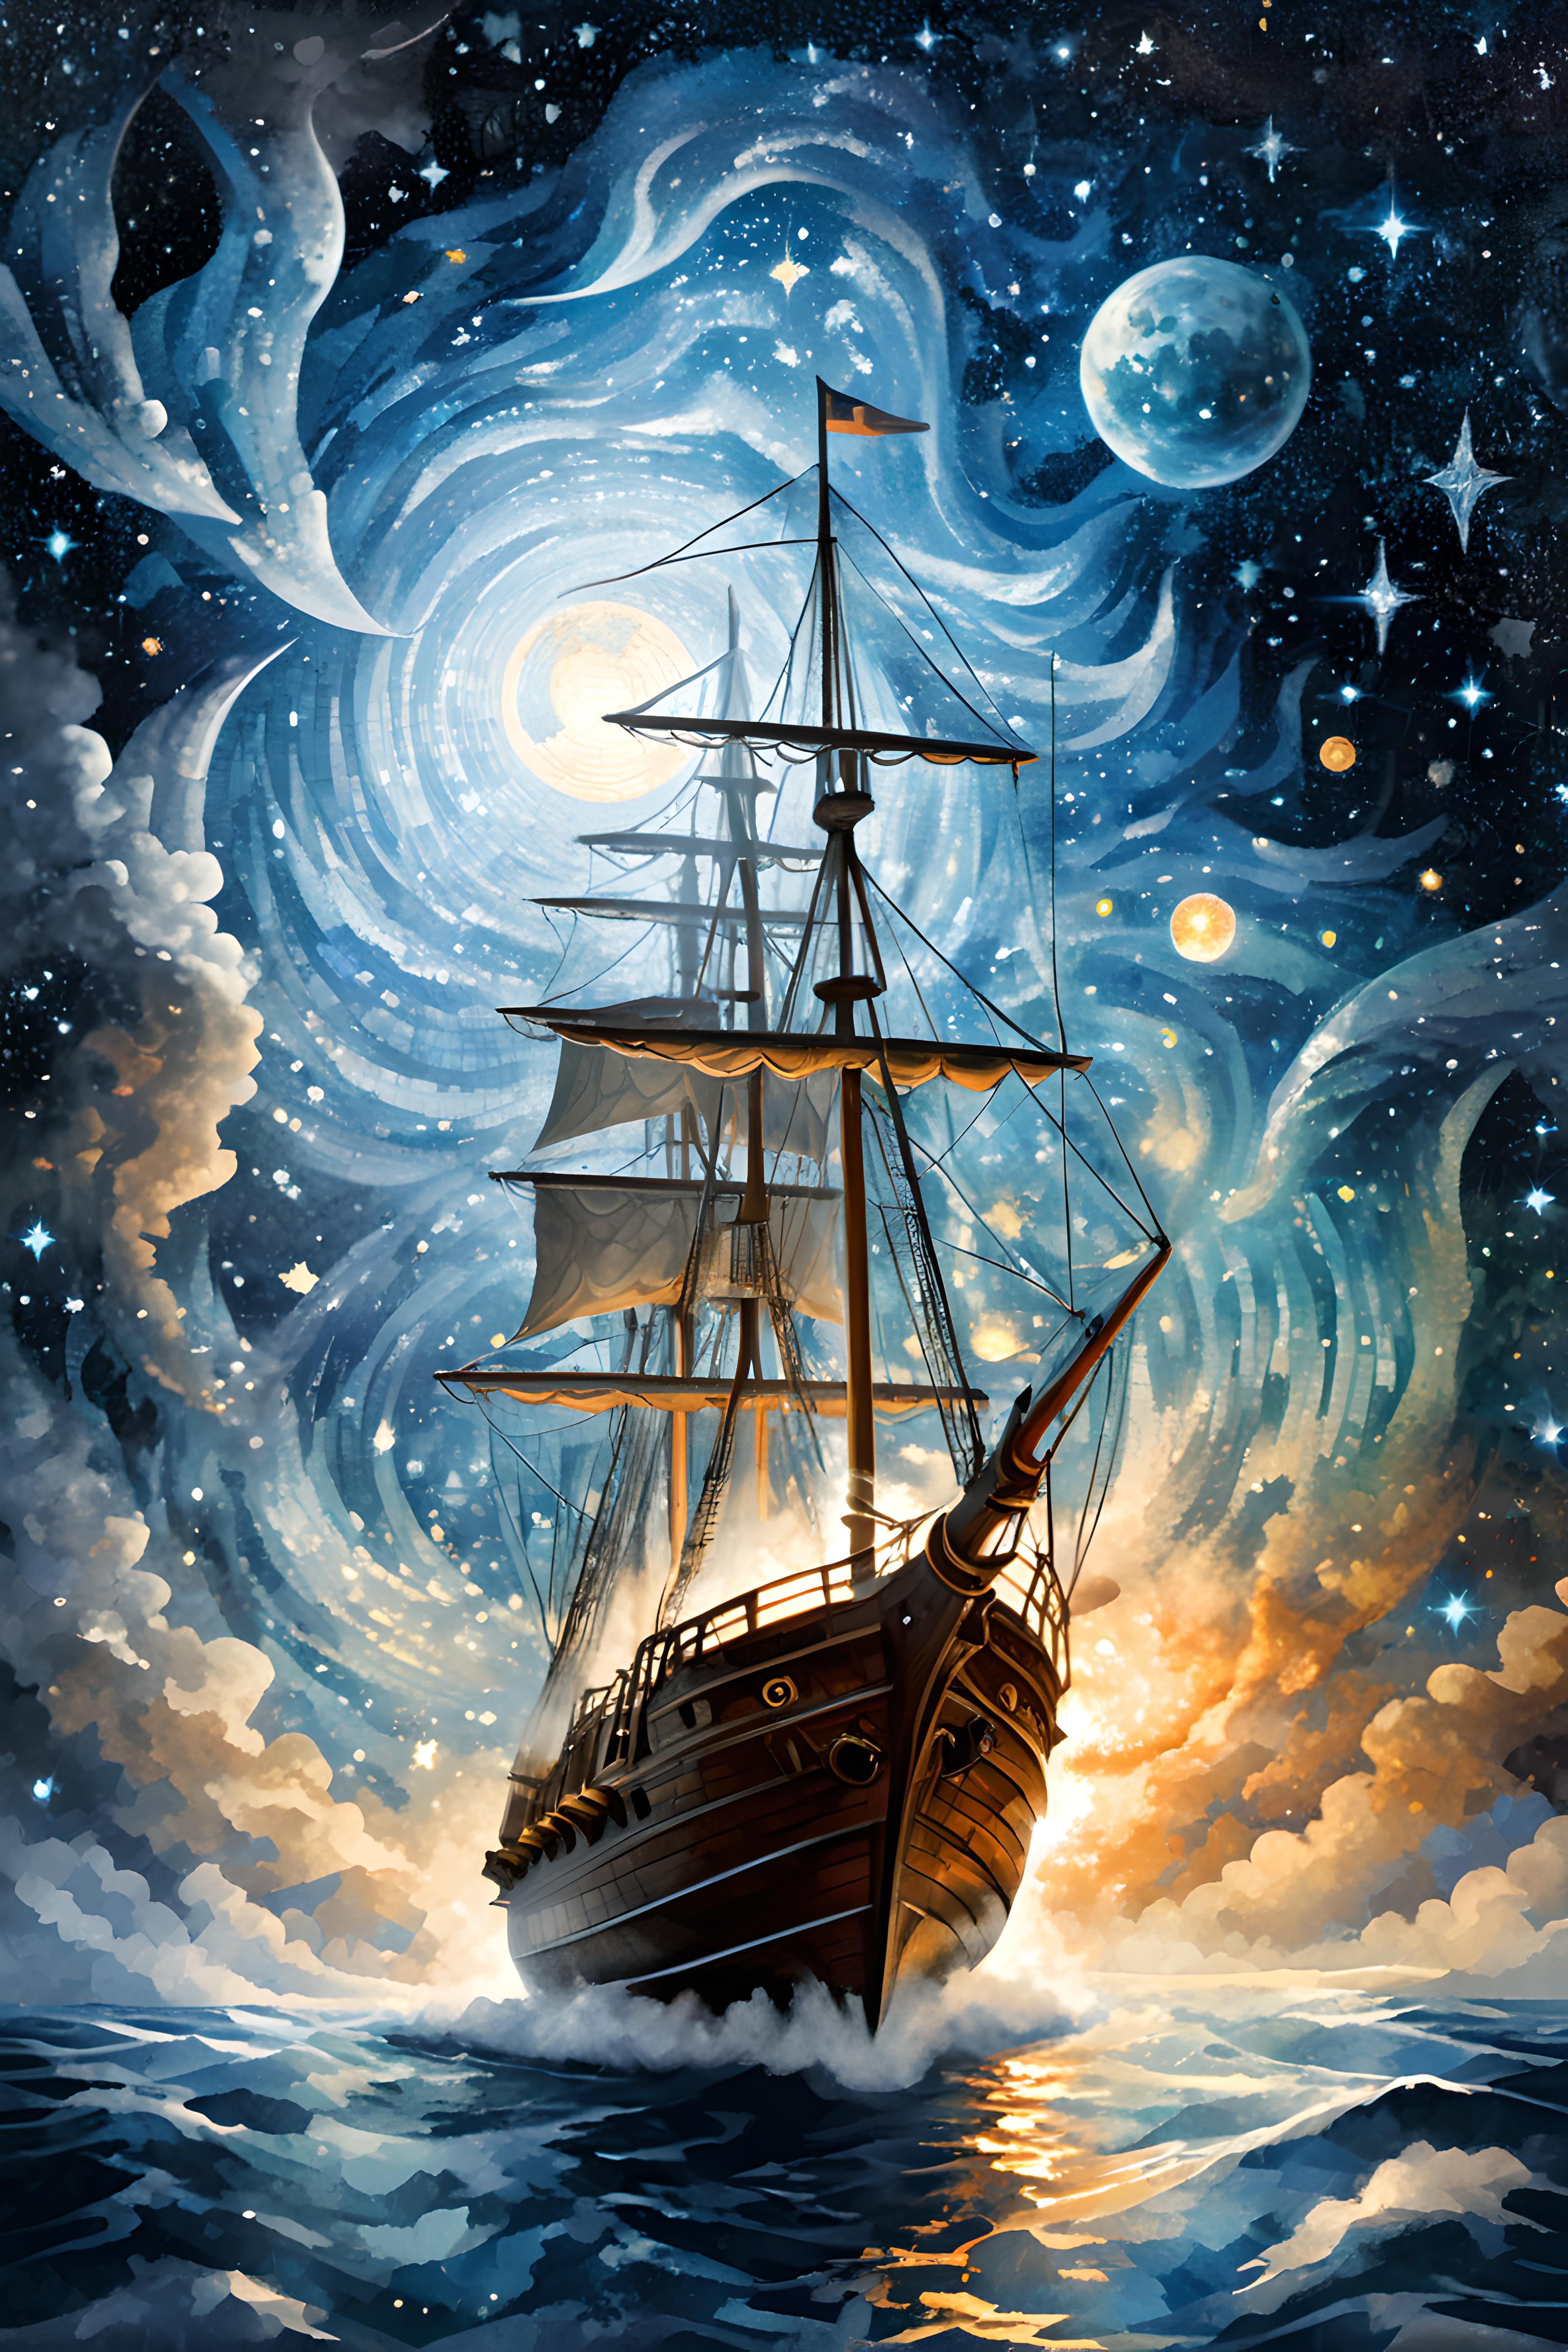 A majestic sailing ship with a bright starry night sky in the background.